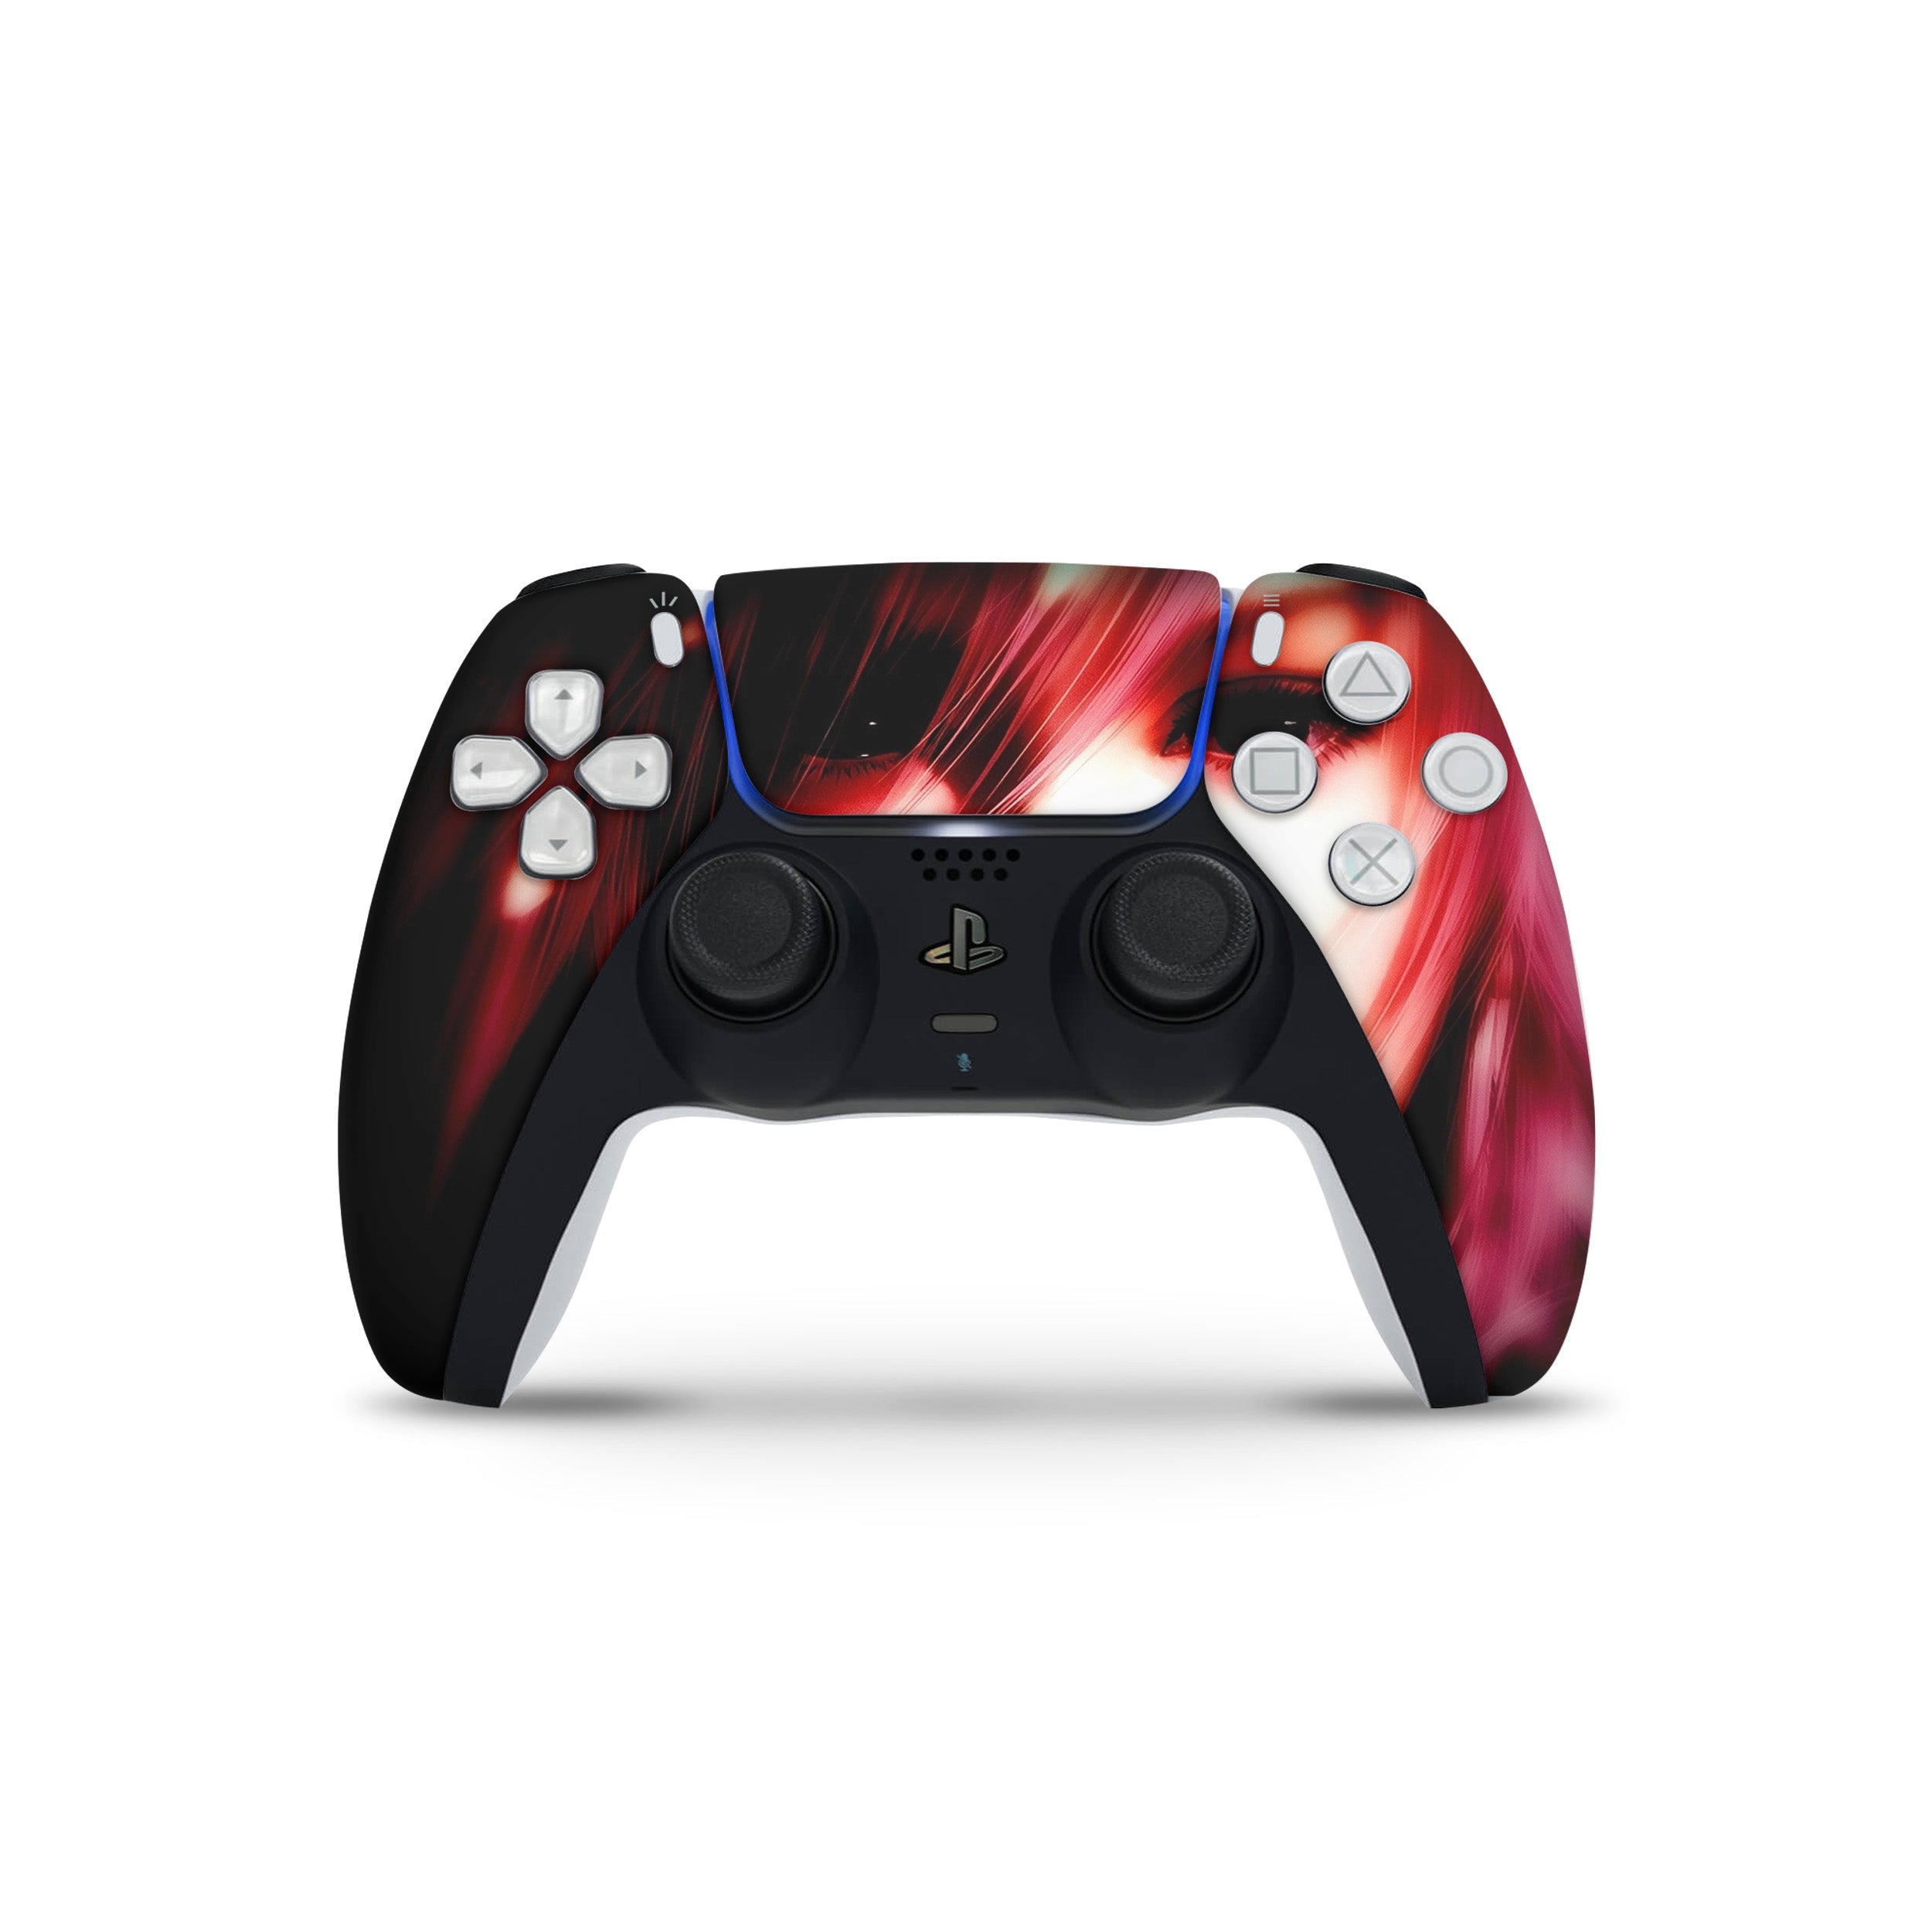 A video game skin featuring a Final Fantasy 13 Lightning design for the PS5 DualSense Controller.